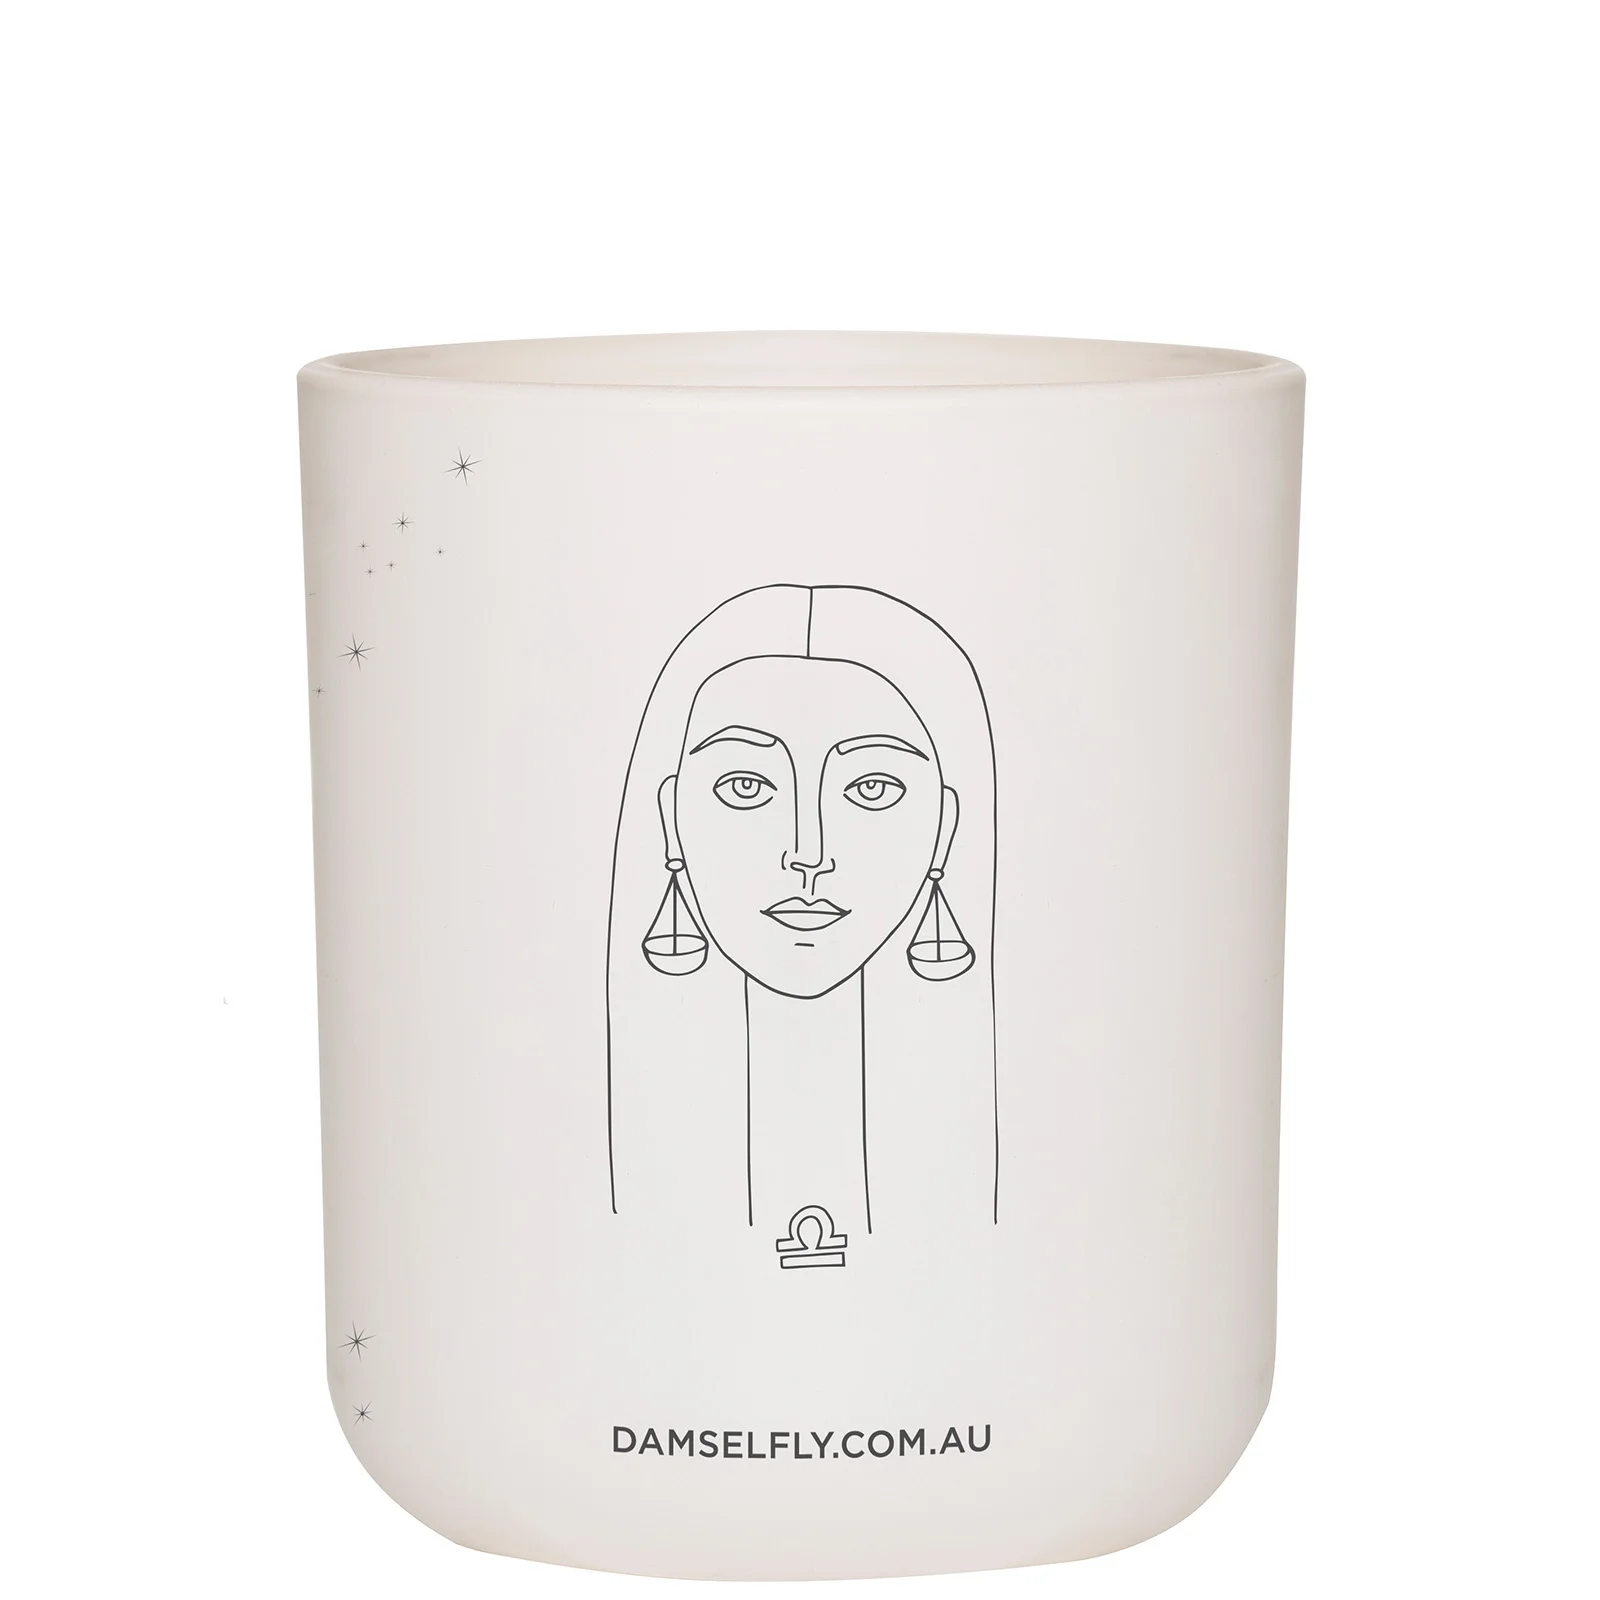 Damselfly Libra Scented Candle - 300g Image 1